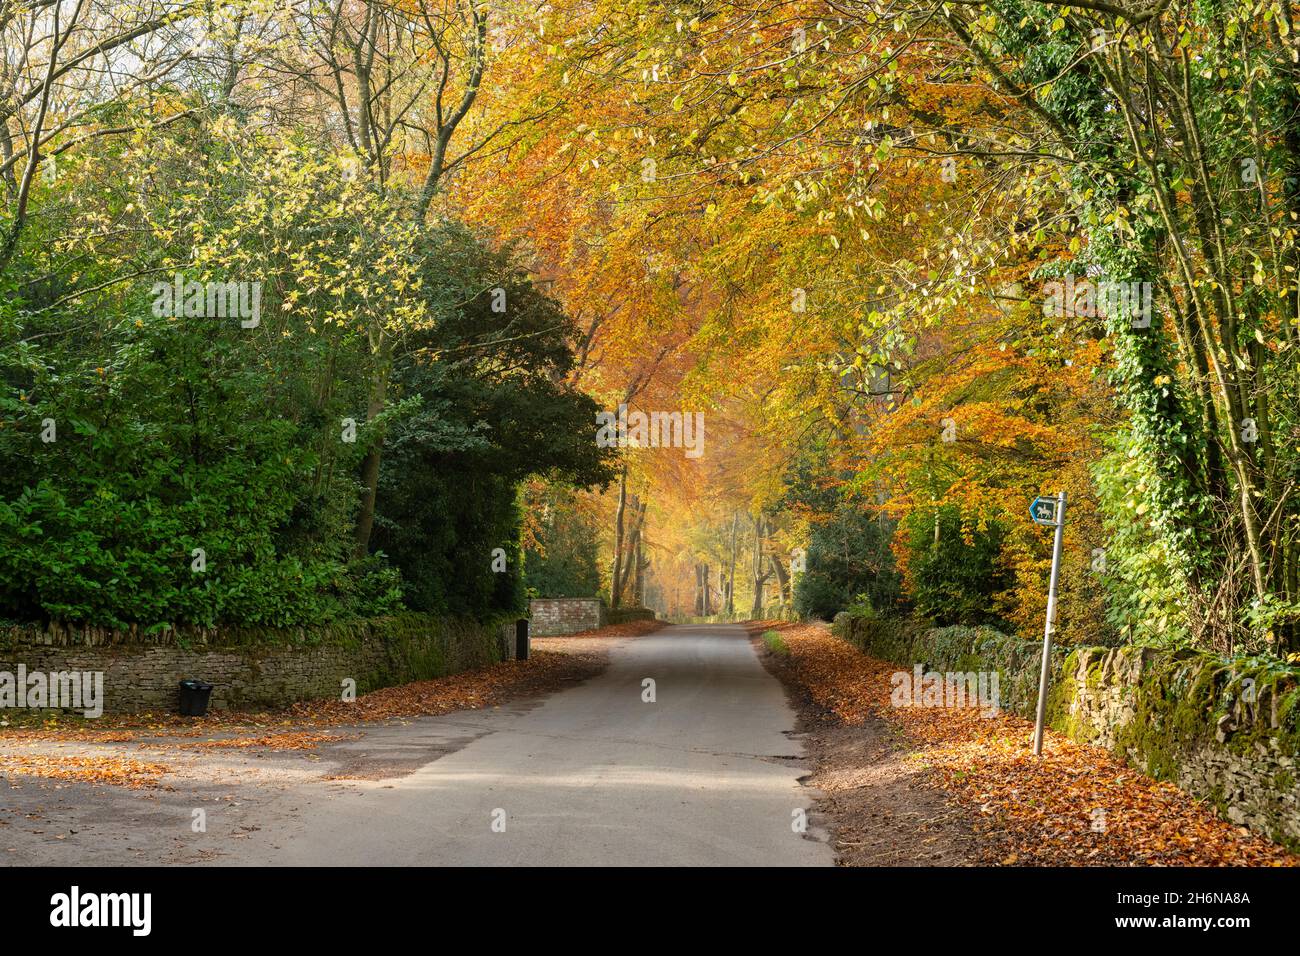 Fagus sylvatica. Autumn Beech trees along a country road. Stow on the Wold, Cotswolds, Gloucestershire, England Stock Photo